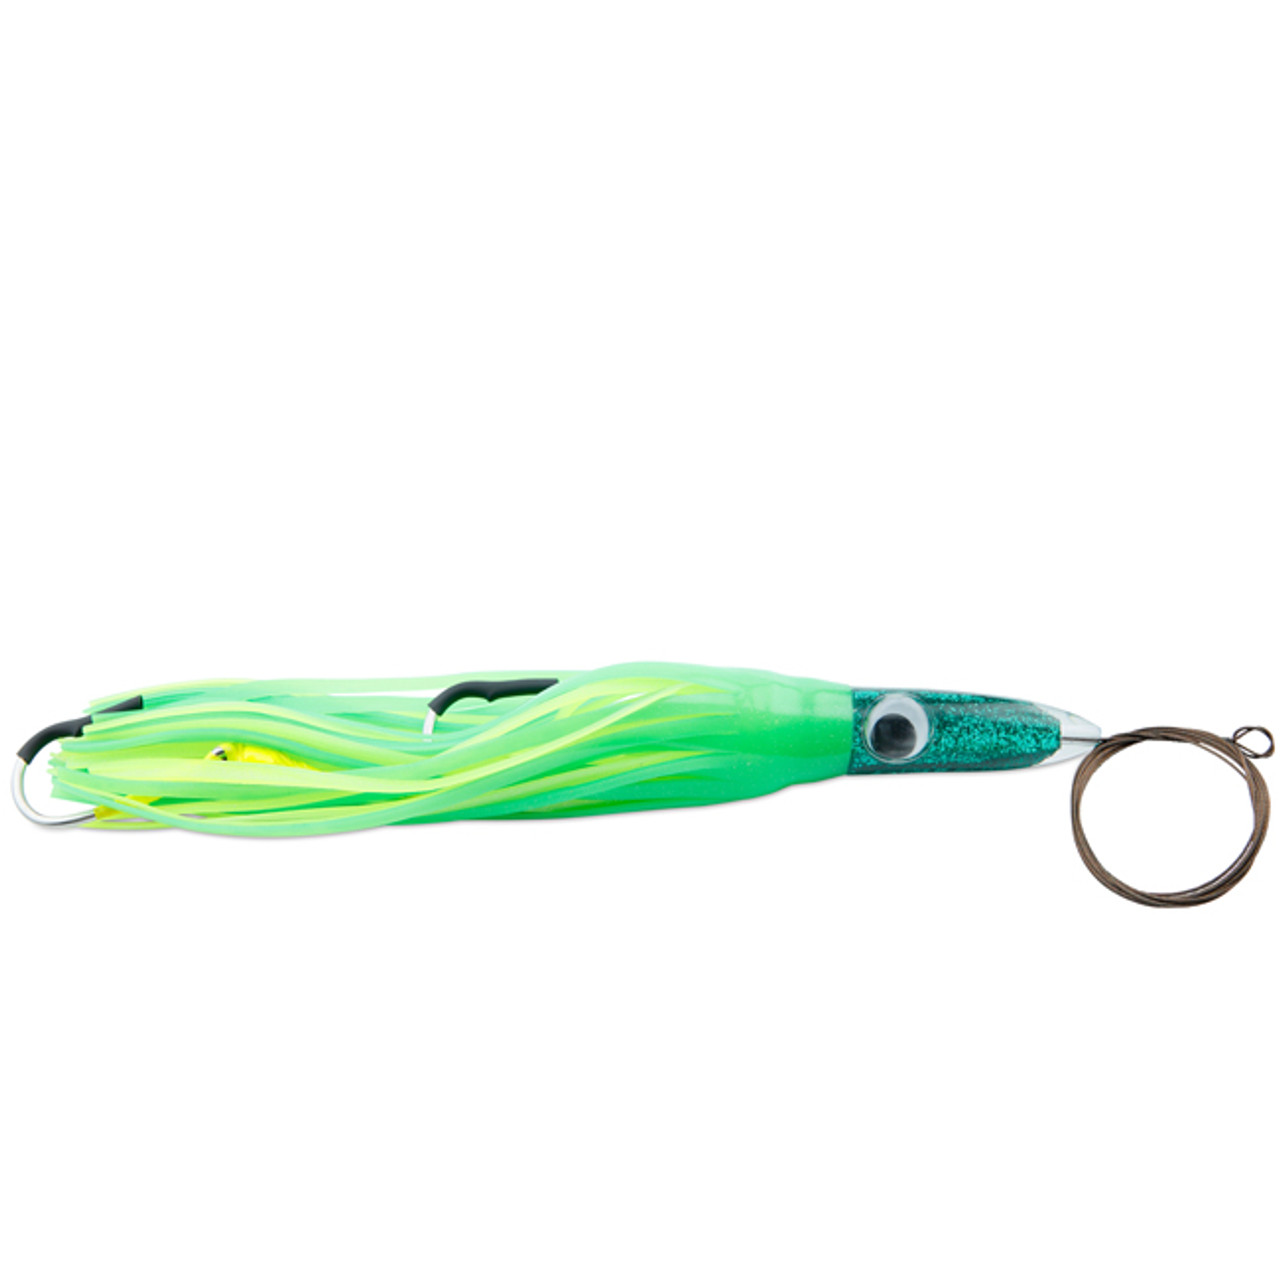 C&H Wahoo Whacker XL Lure Rigged - 16in - Pink/White